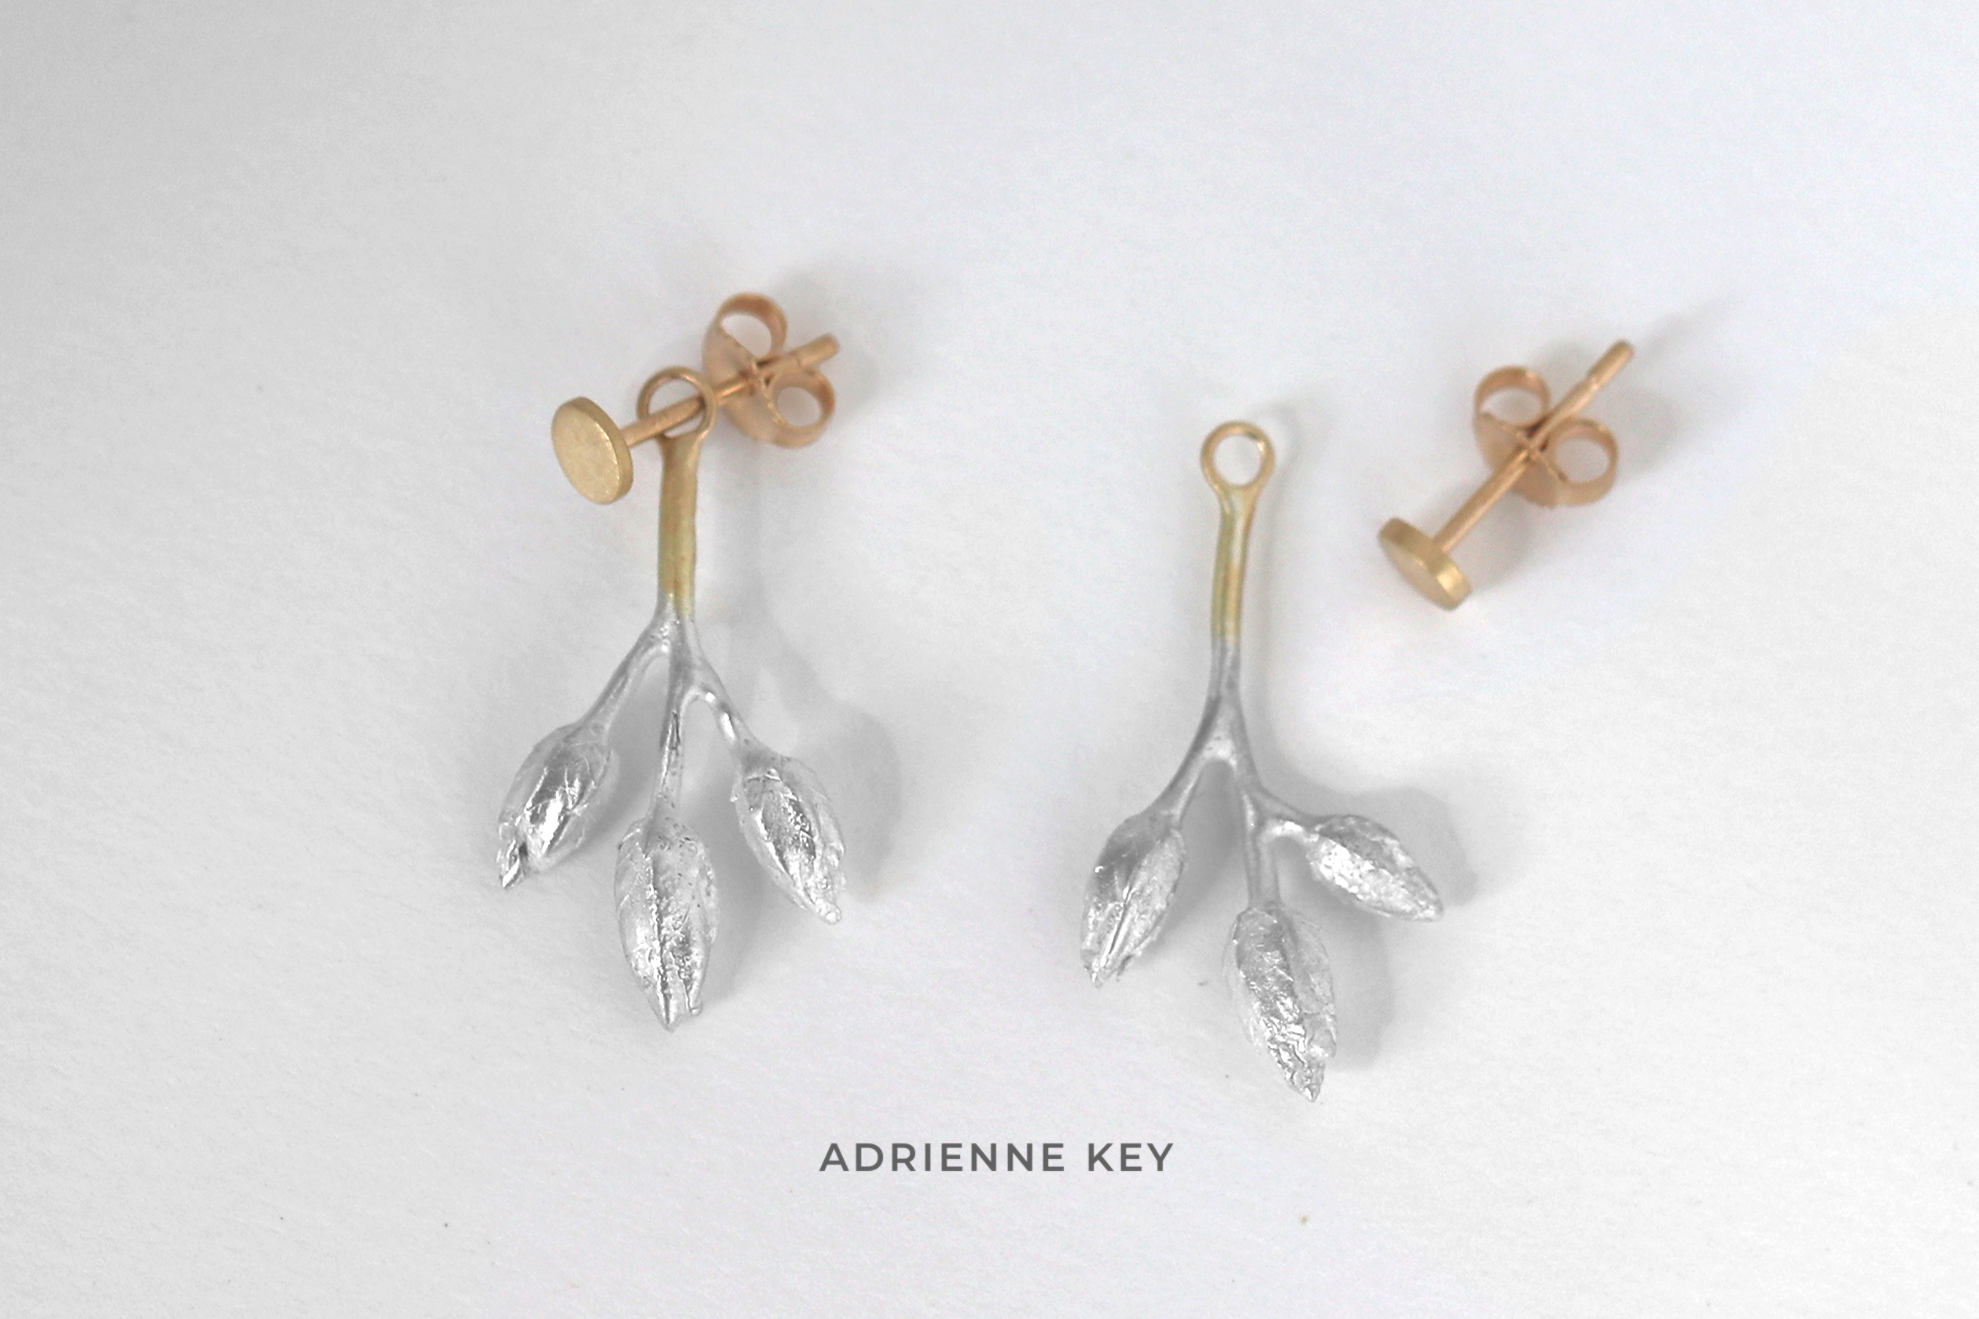 Cast sterling silver seed pod earring jackets with 14k yellow gold details and accompanying post earrings and 